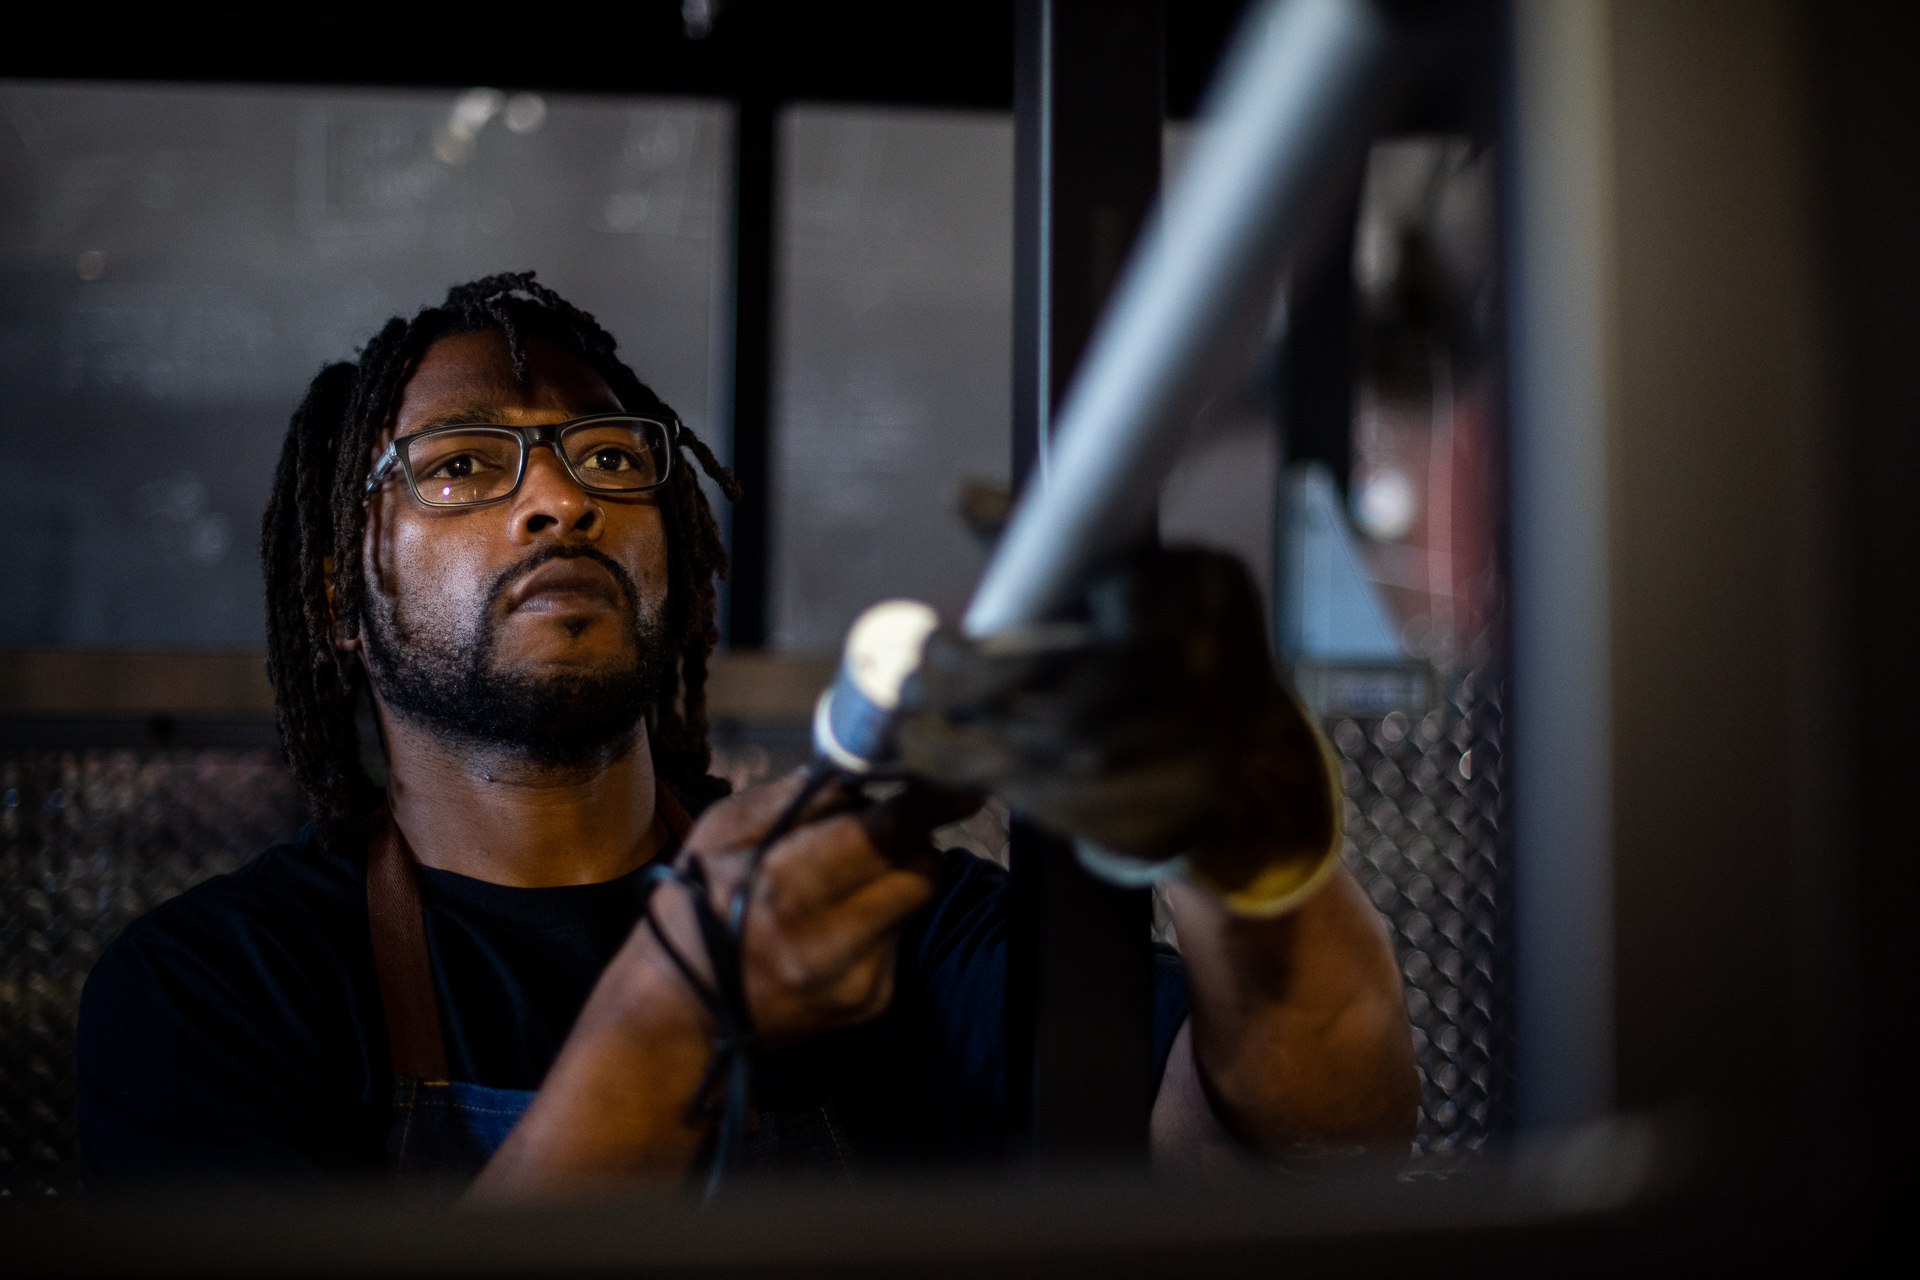 Man looks up pensively as he works with metal equipment.